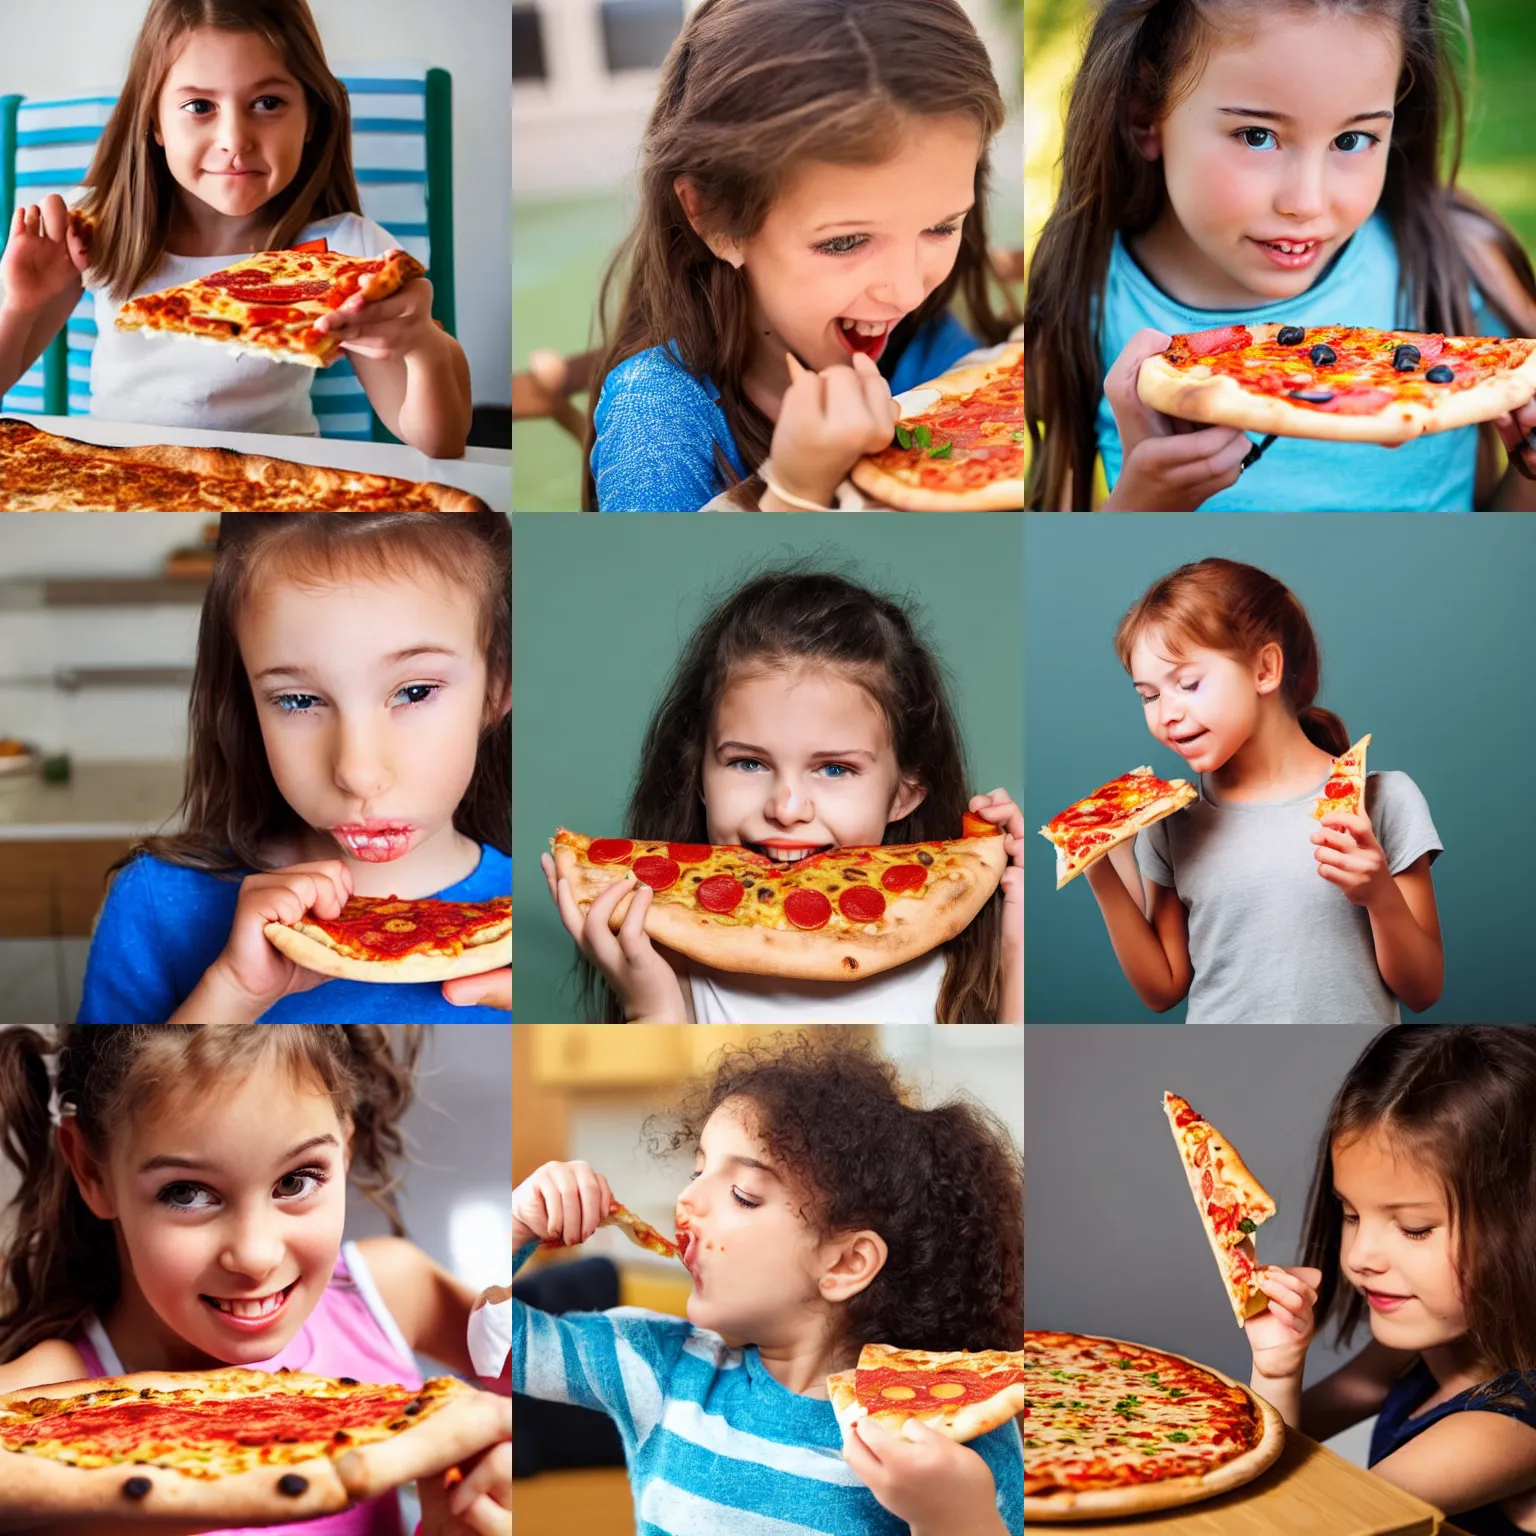 Prompt: a young girl eating a very tasty looking slice of pizza